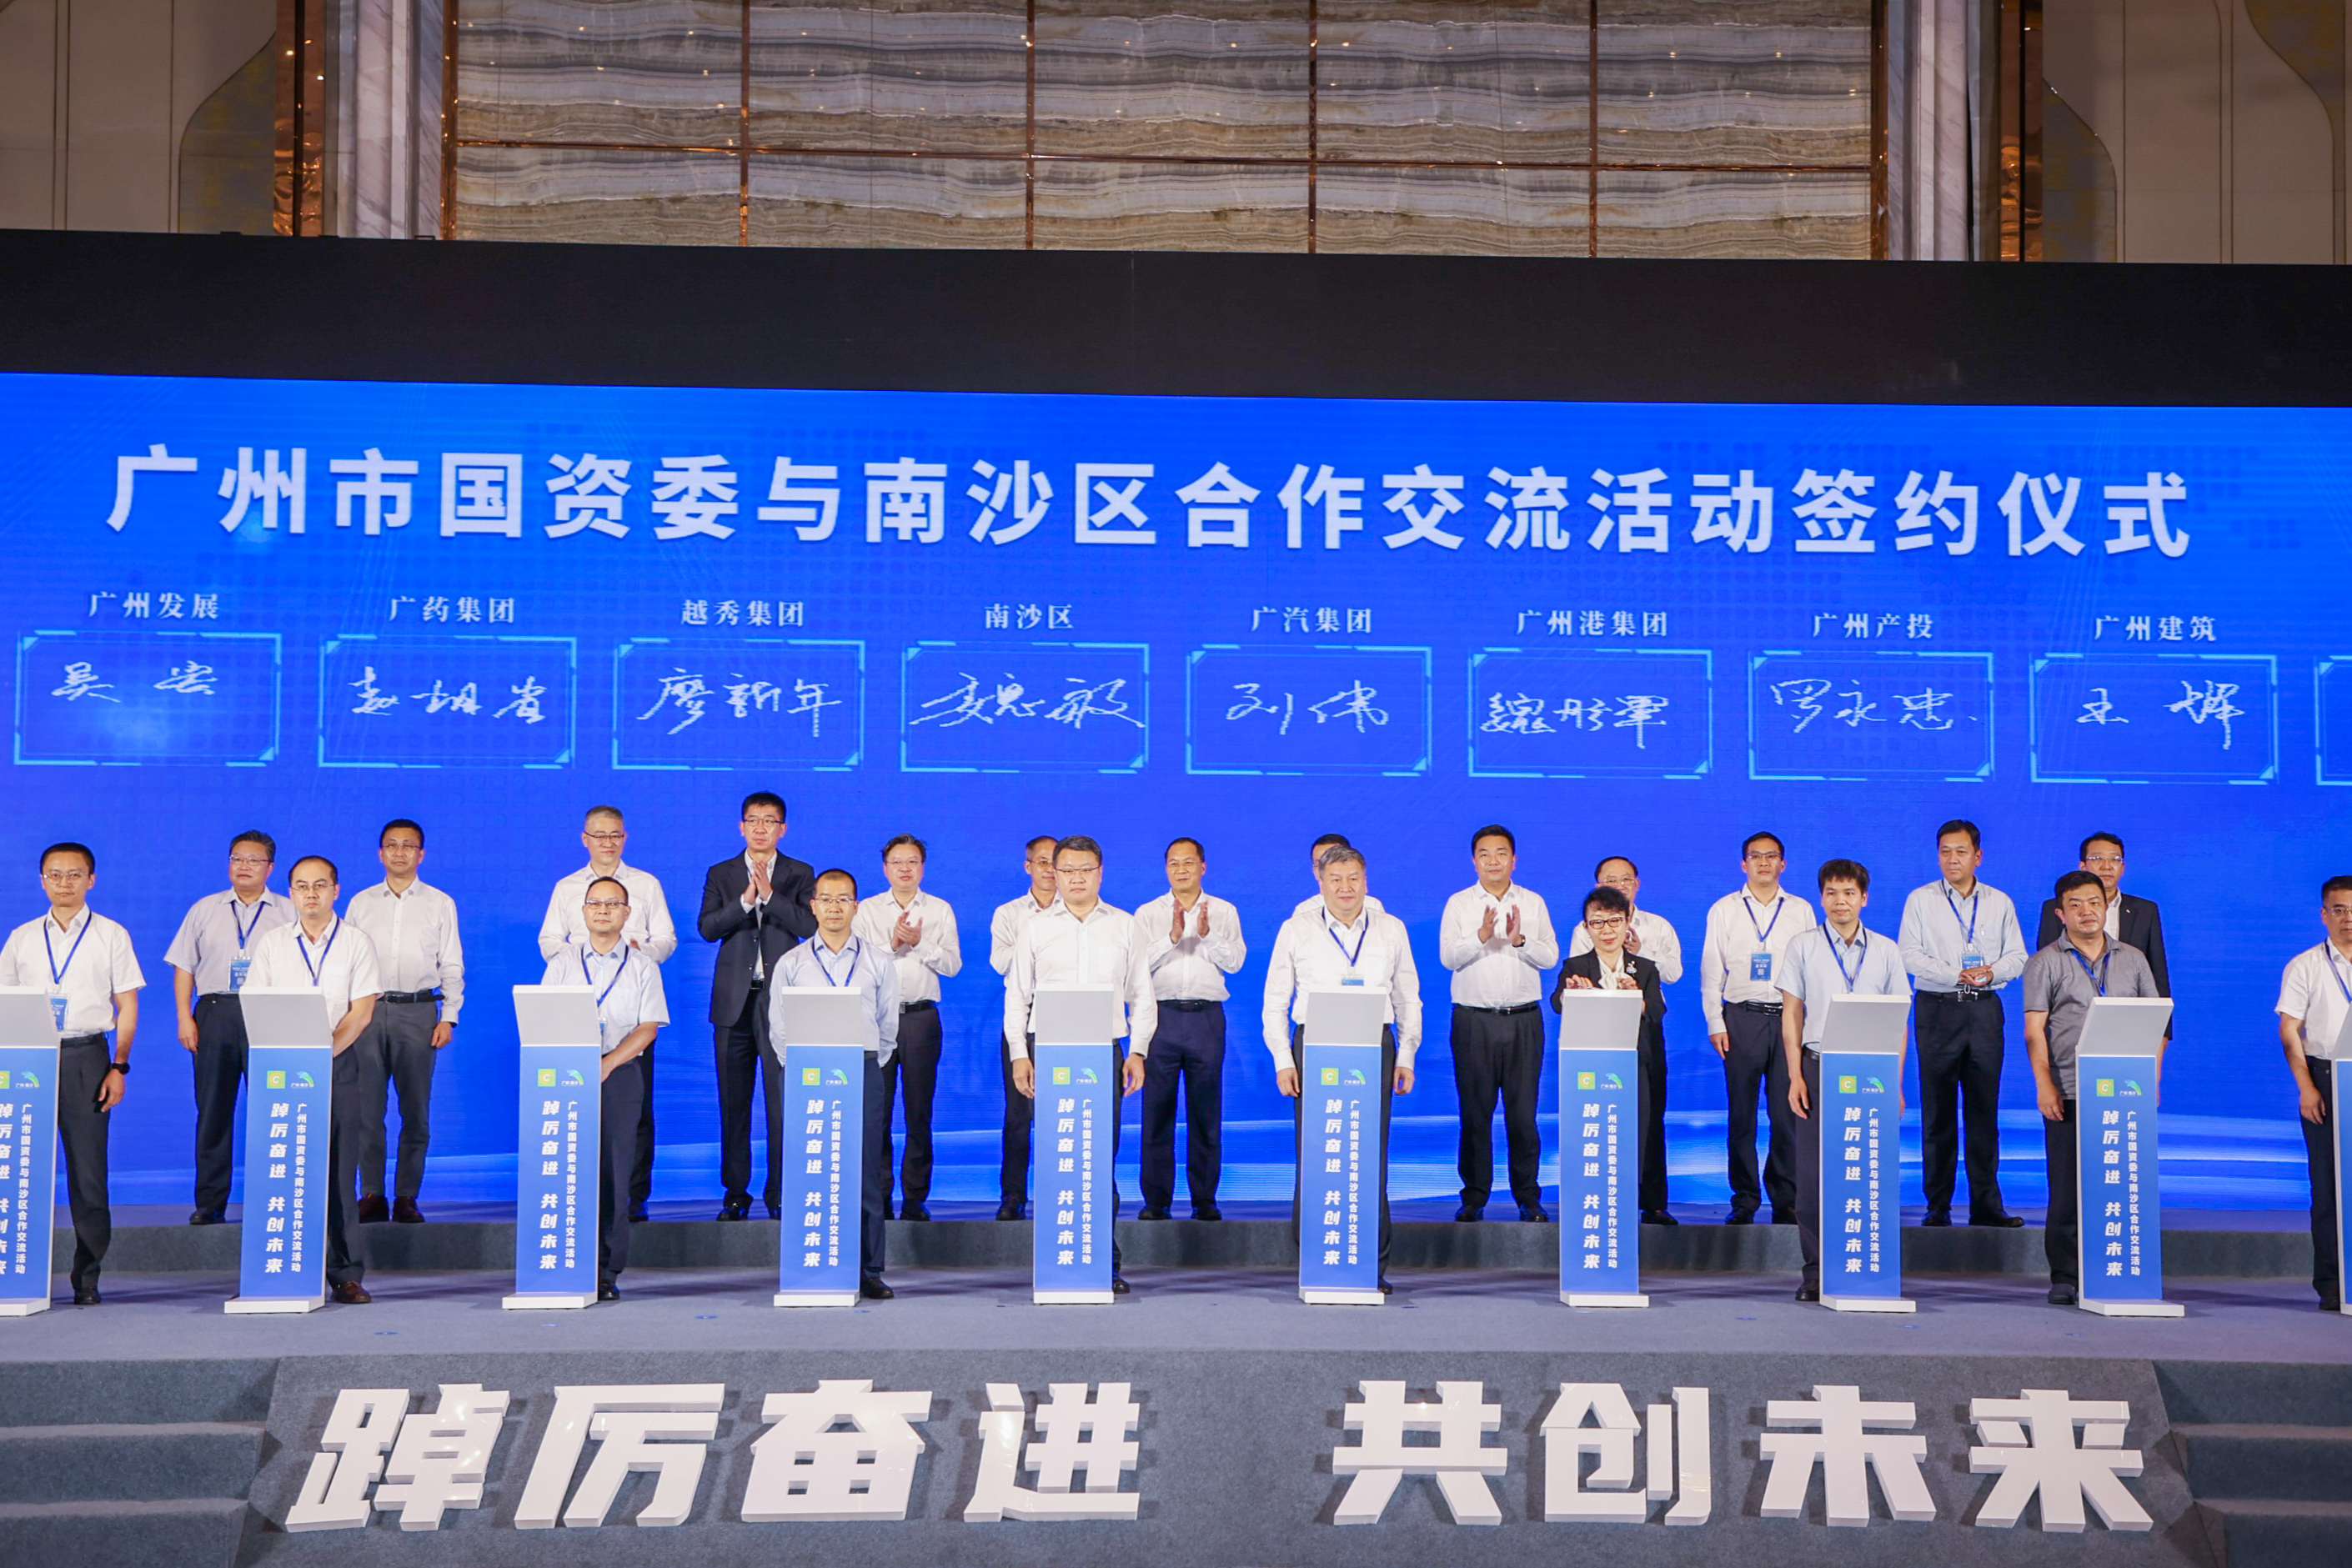 27 state-owned enterprises land projects in Nansha, investment up to 41 billion RMB